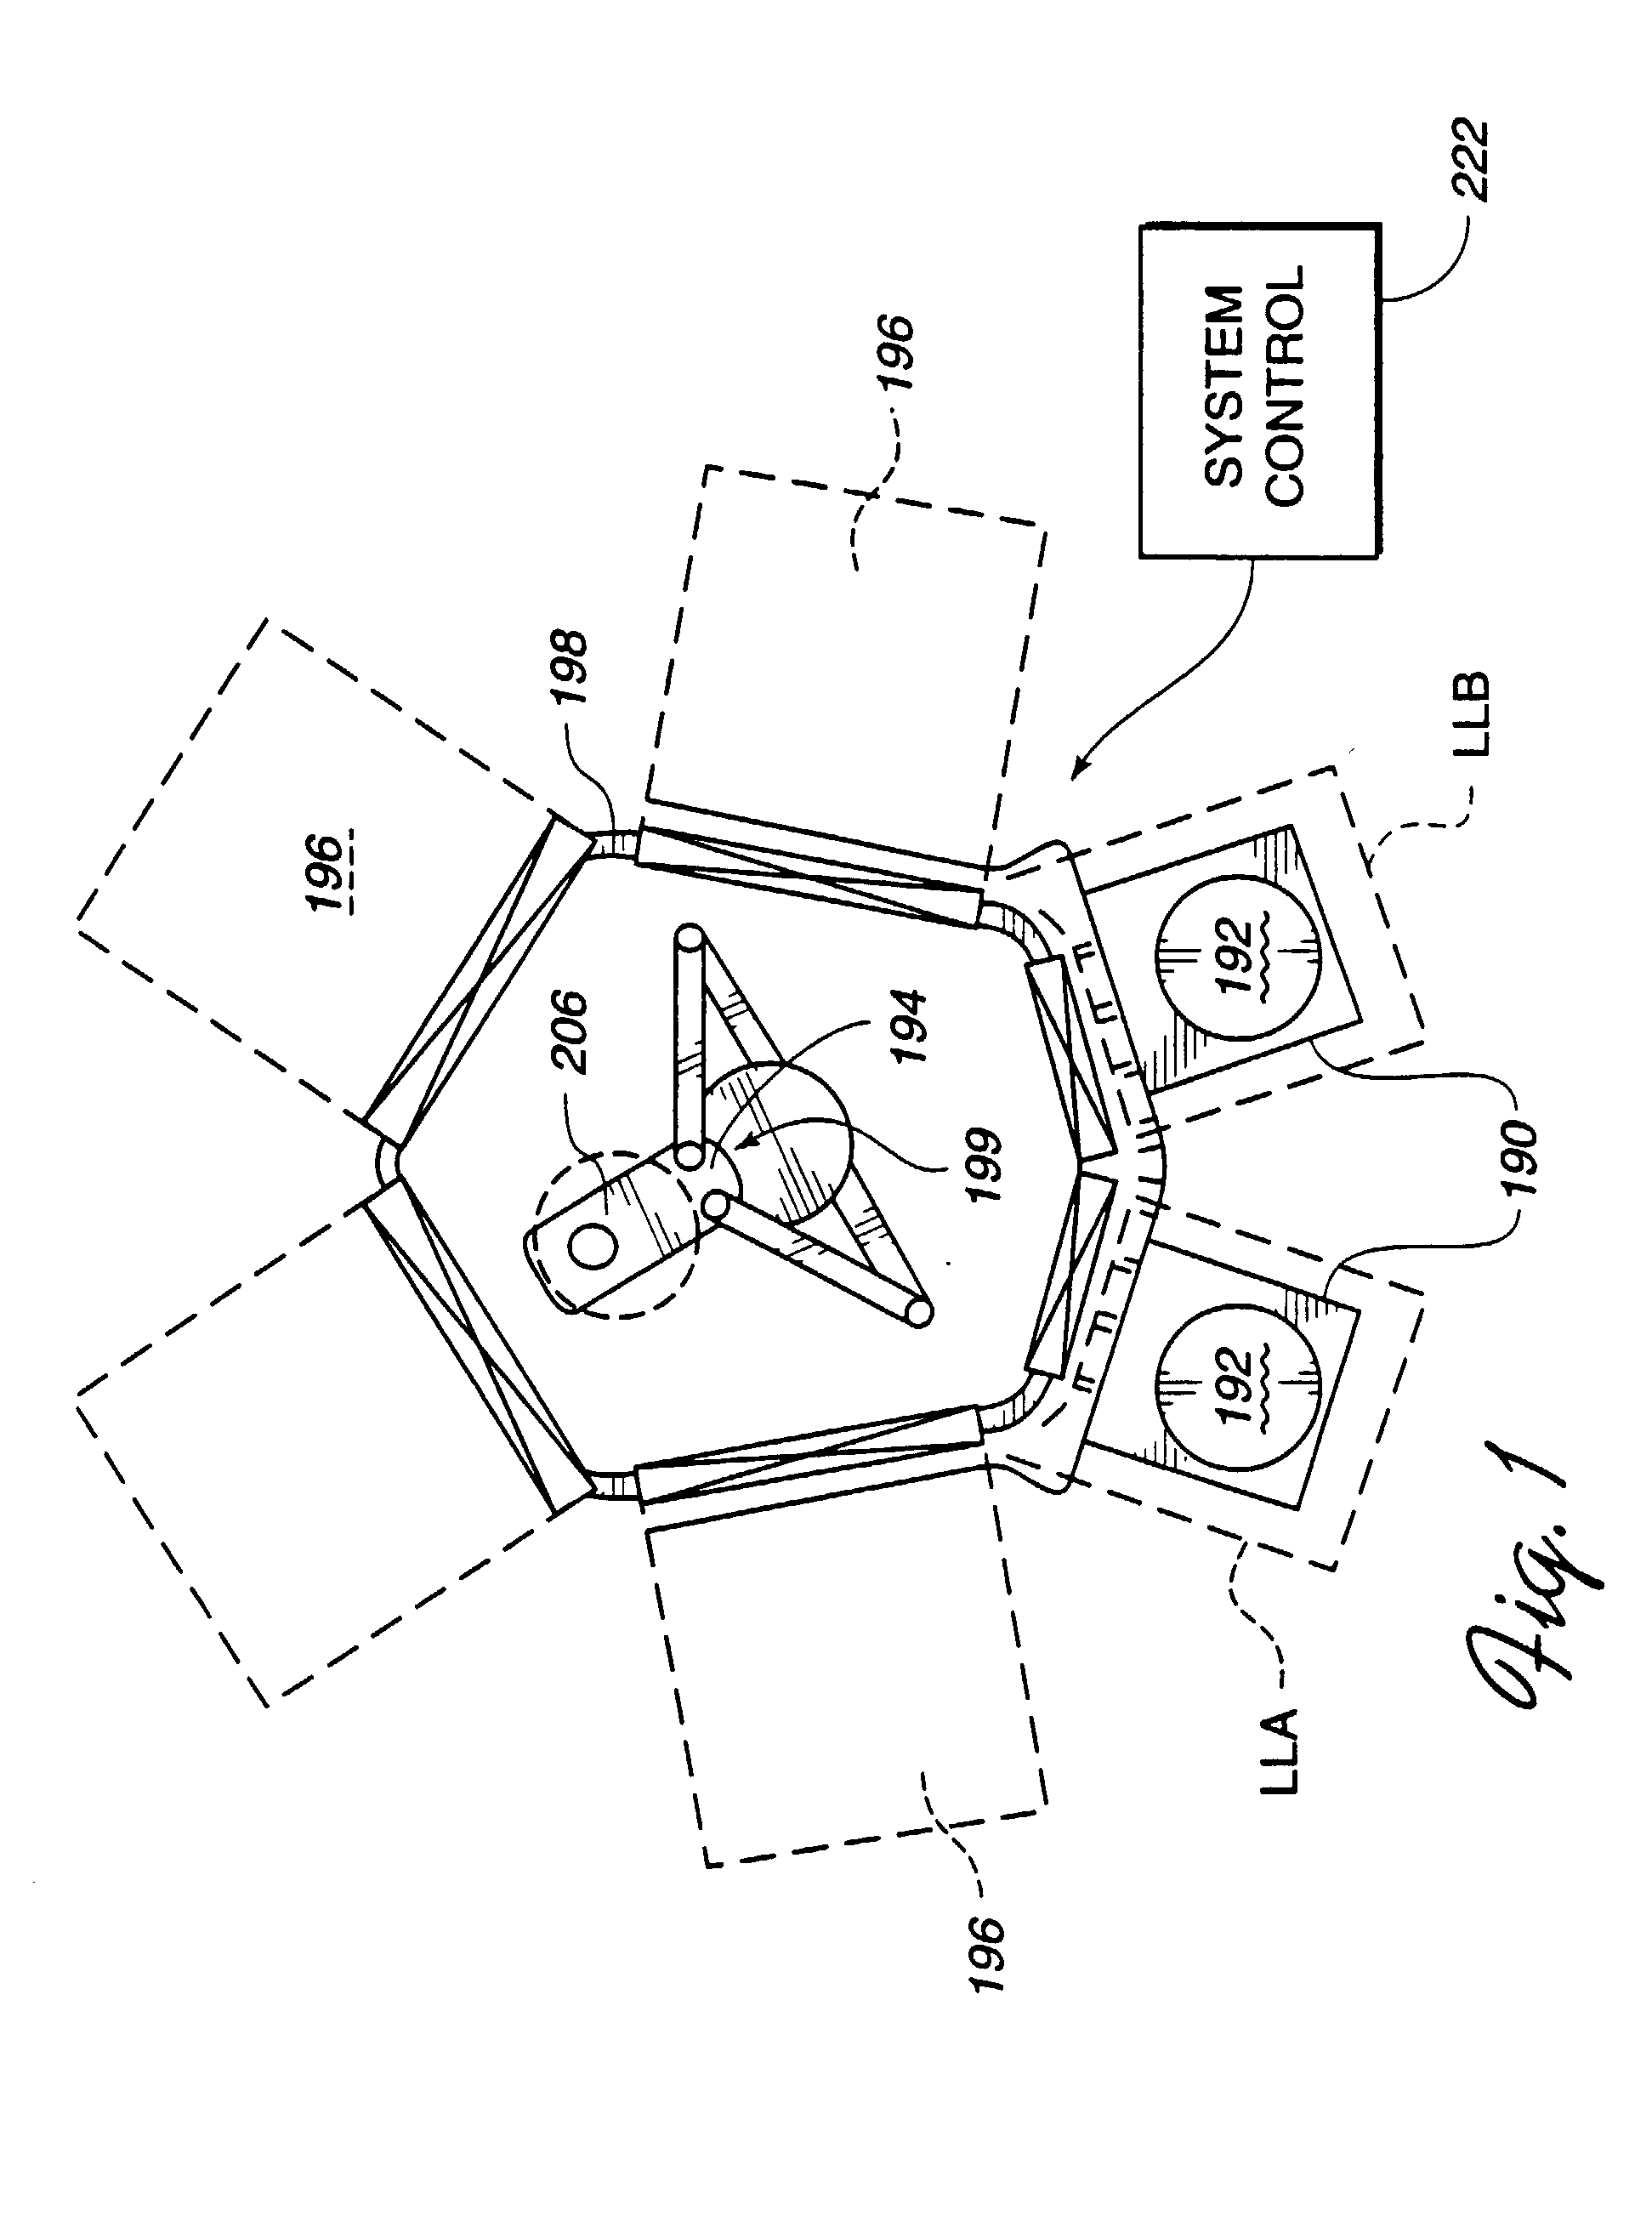 Method and apparatus for aligning a cassette